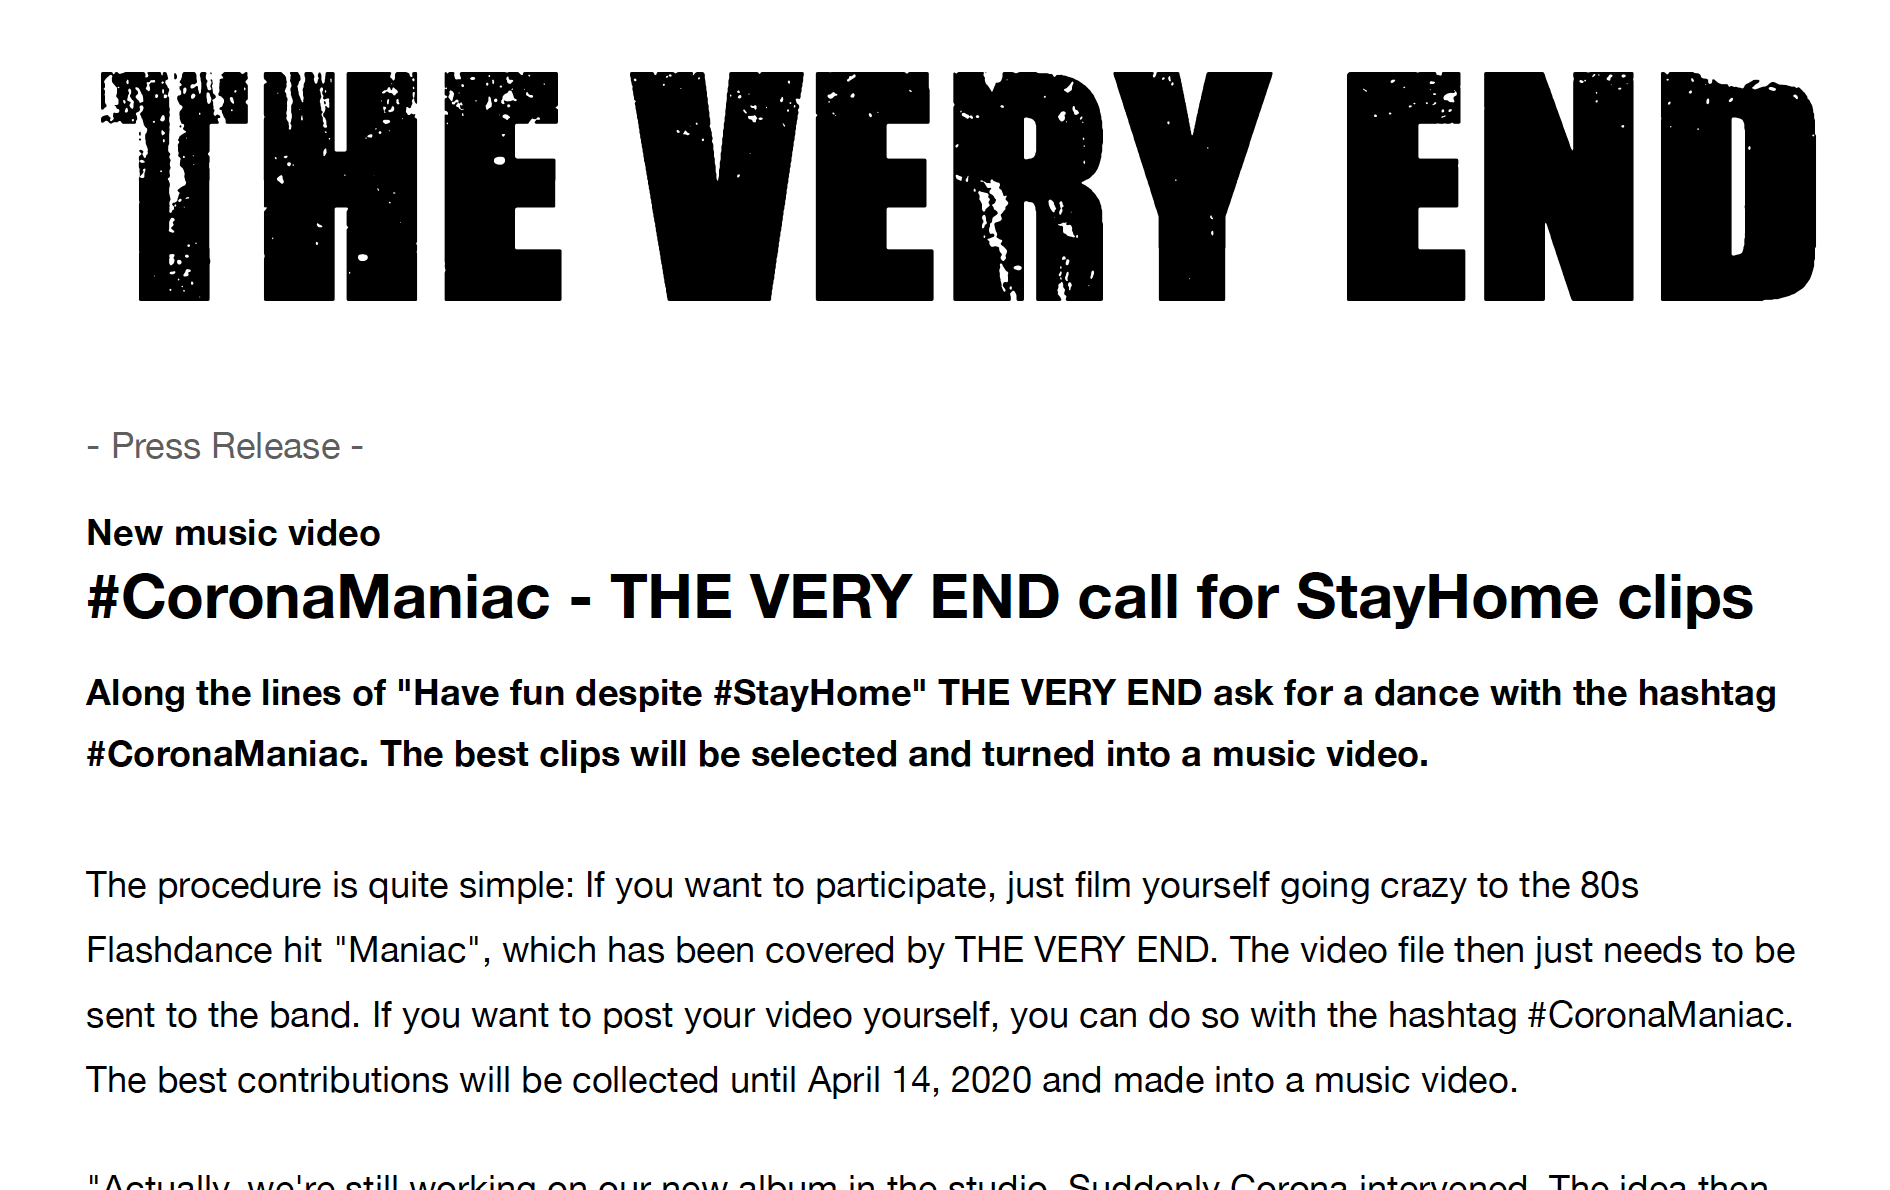 ENGLISH: #CoronaManiac - THE VERY END call for StayHome clips - press release